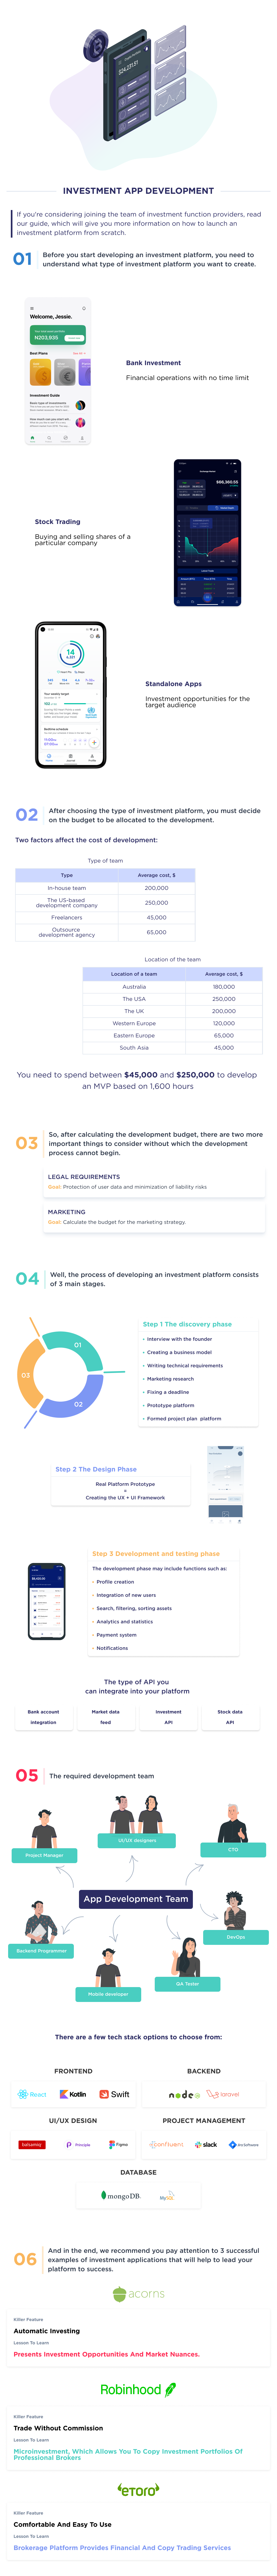 This infographic describes the step-by-step process for developing an investment platform, detailing the factors that will affect the development process.